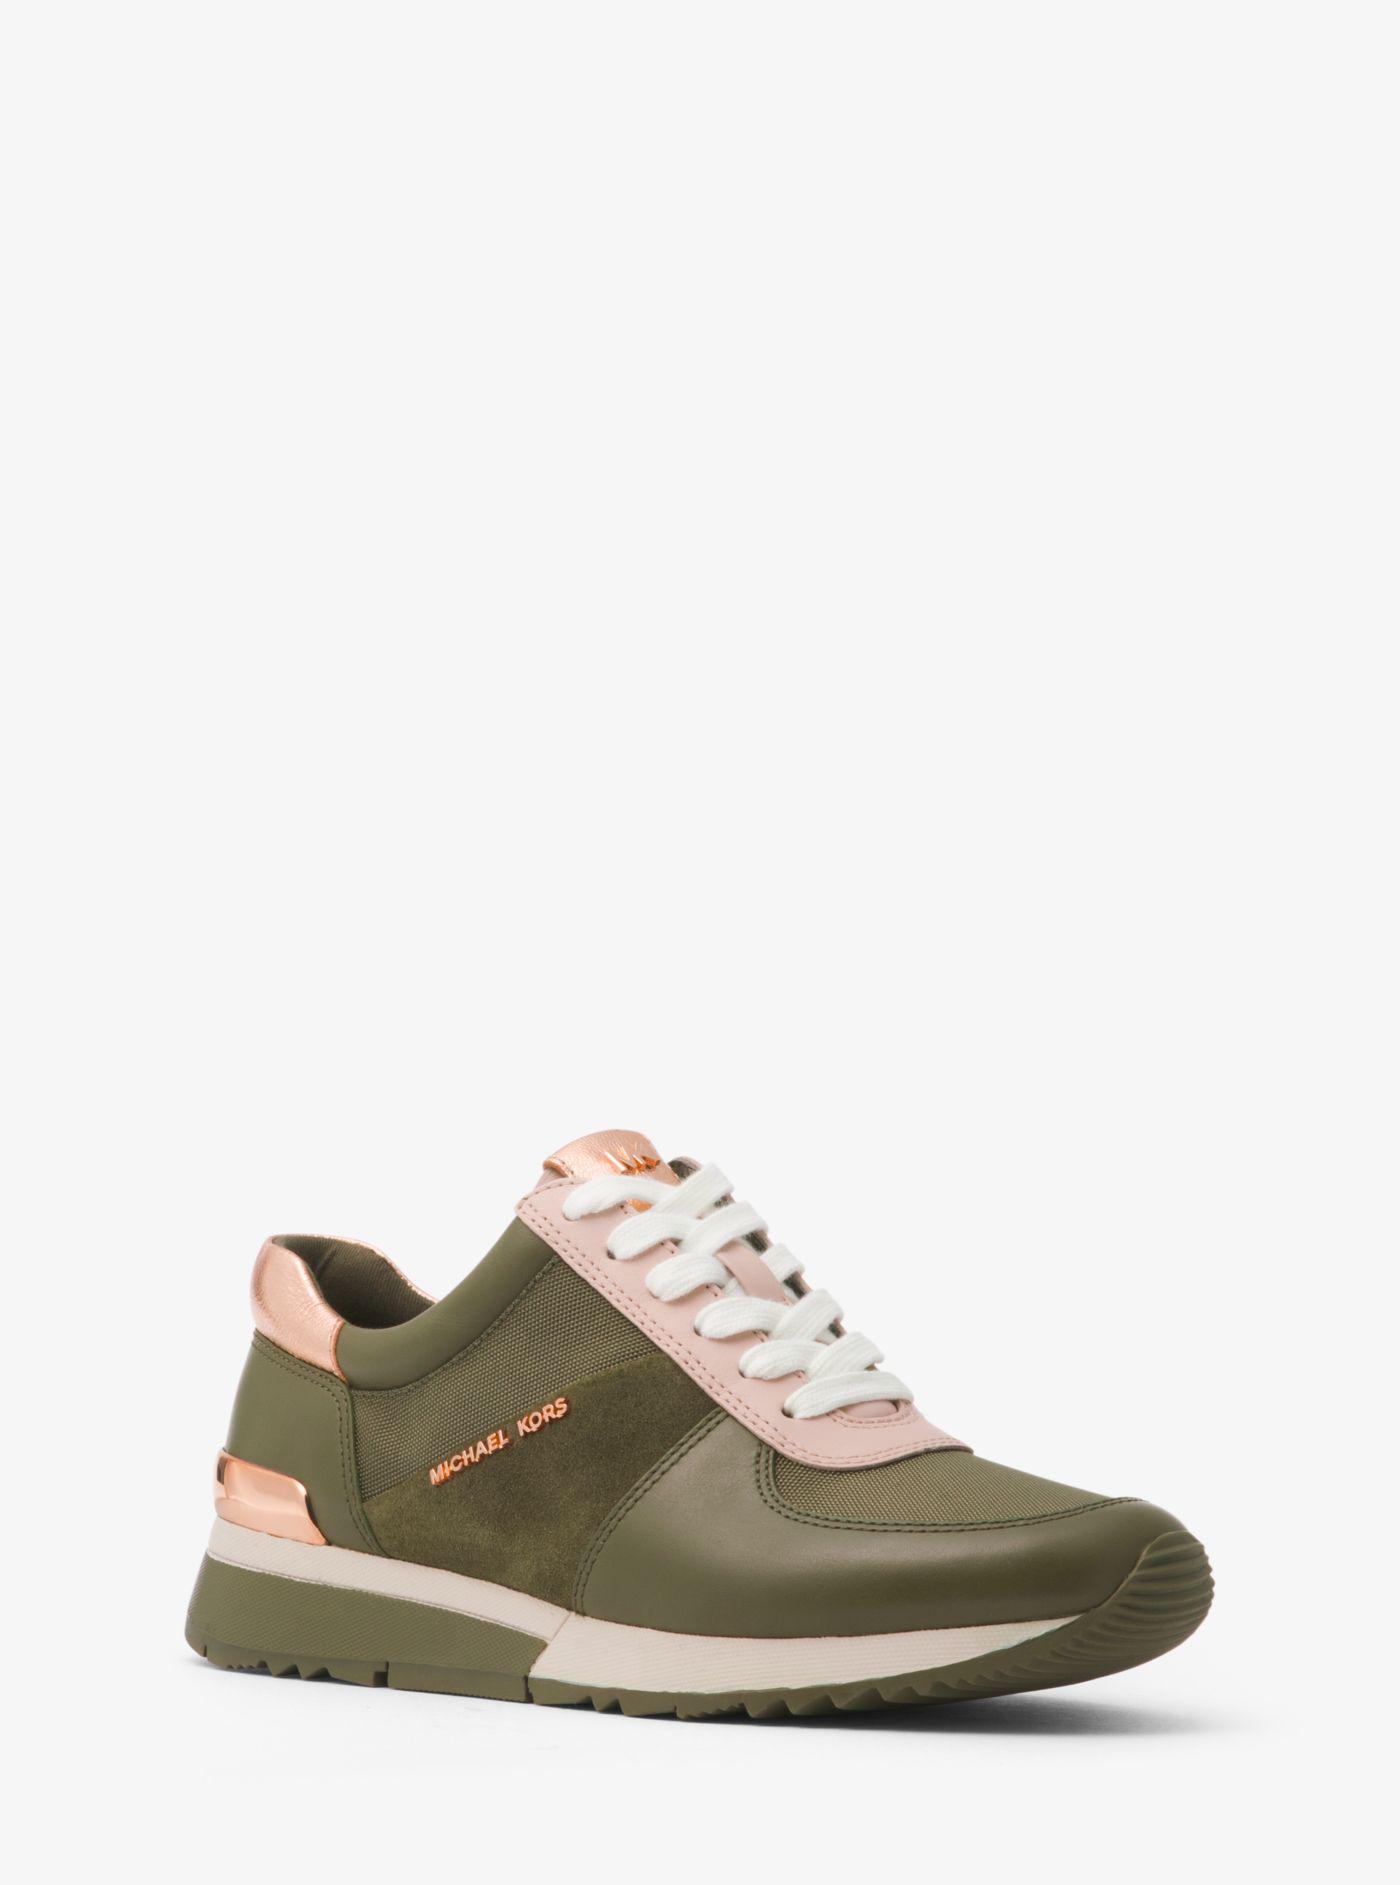 Michael Kors Allie Leather And Canvas Sneaker in Green | Lyst